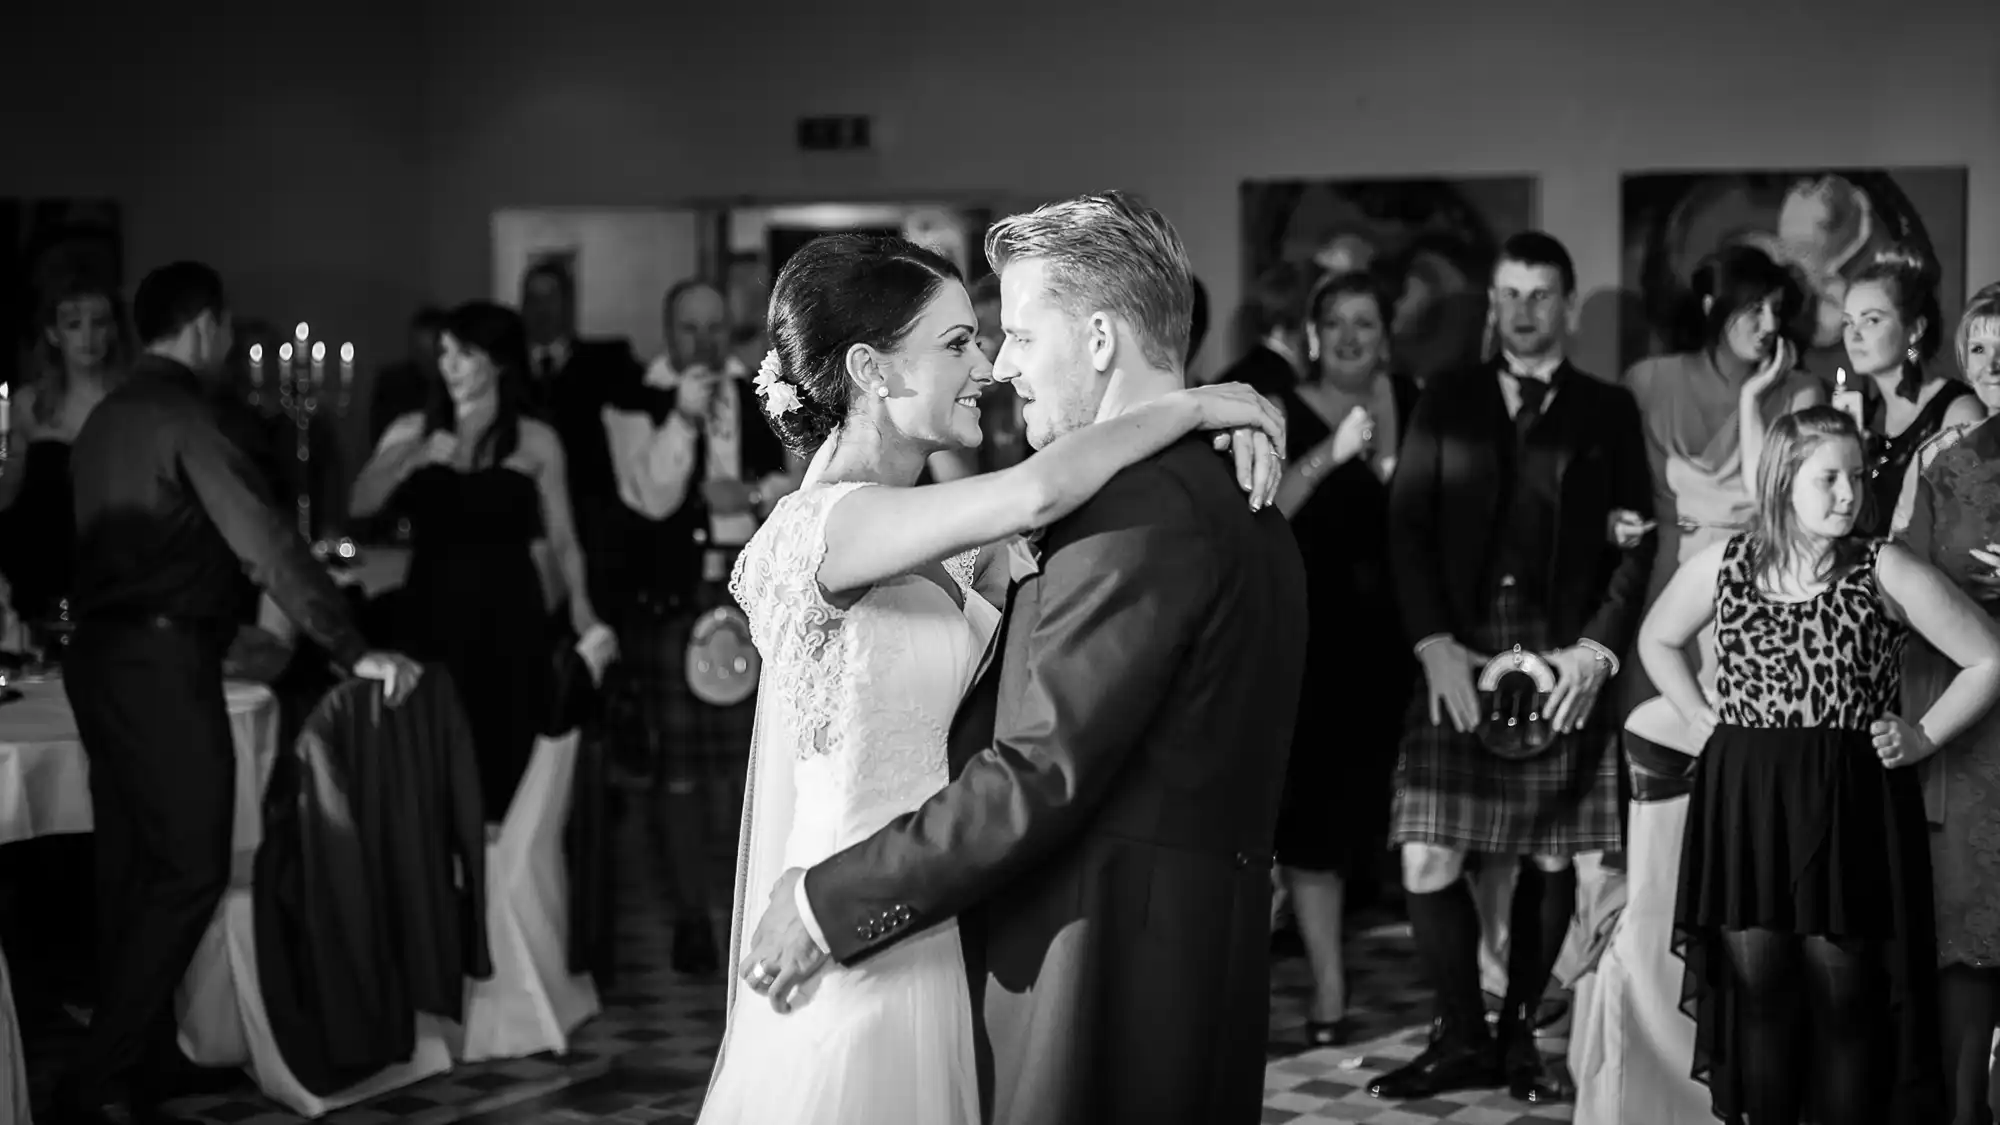 A bride and groom share a dance at their wedding reception, surrounded by guests, in a black and white photo.